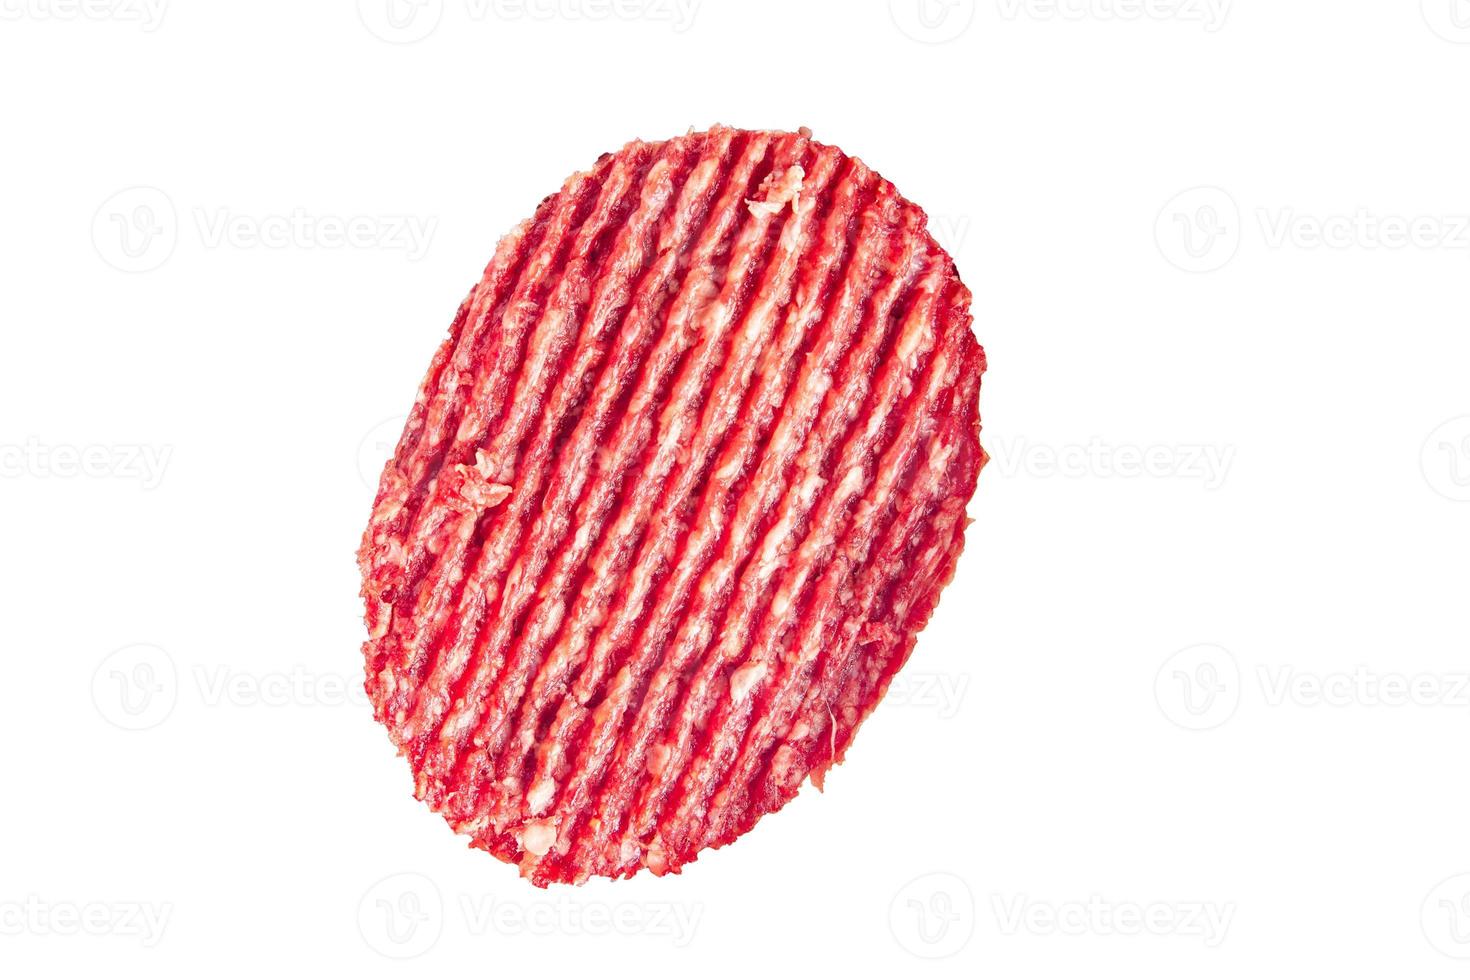 raw beef cutlet burger fresh dish healthy meal food snack on the table copy space food background photo